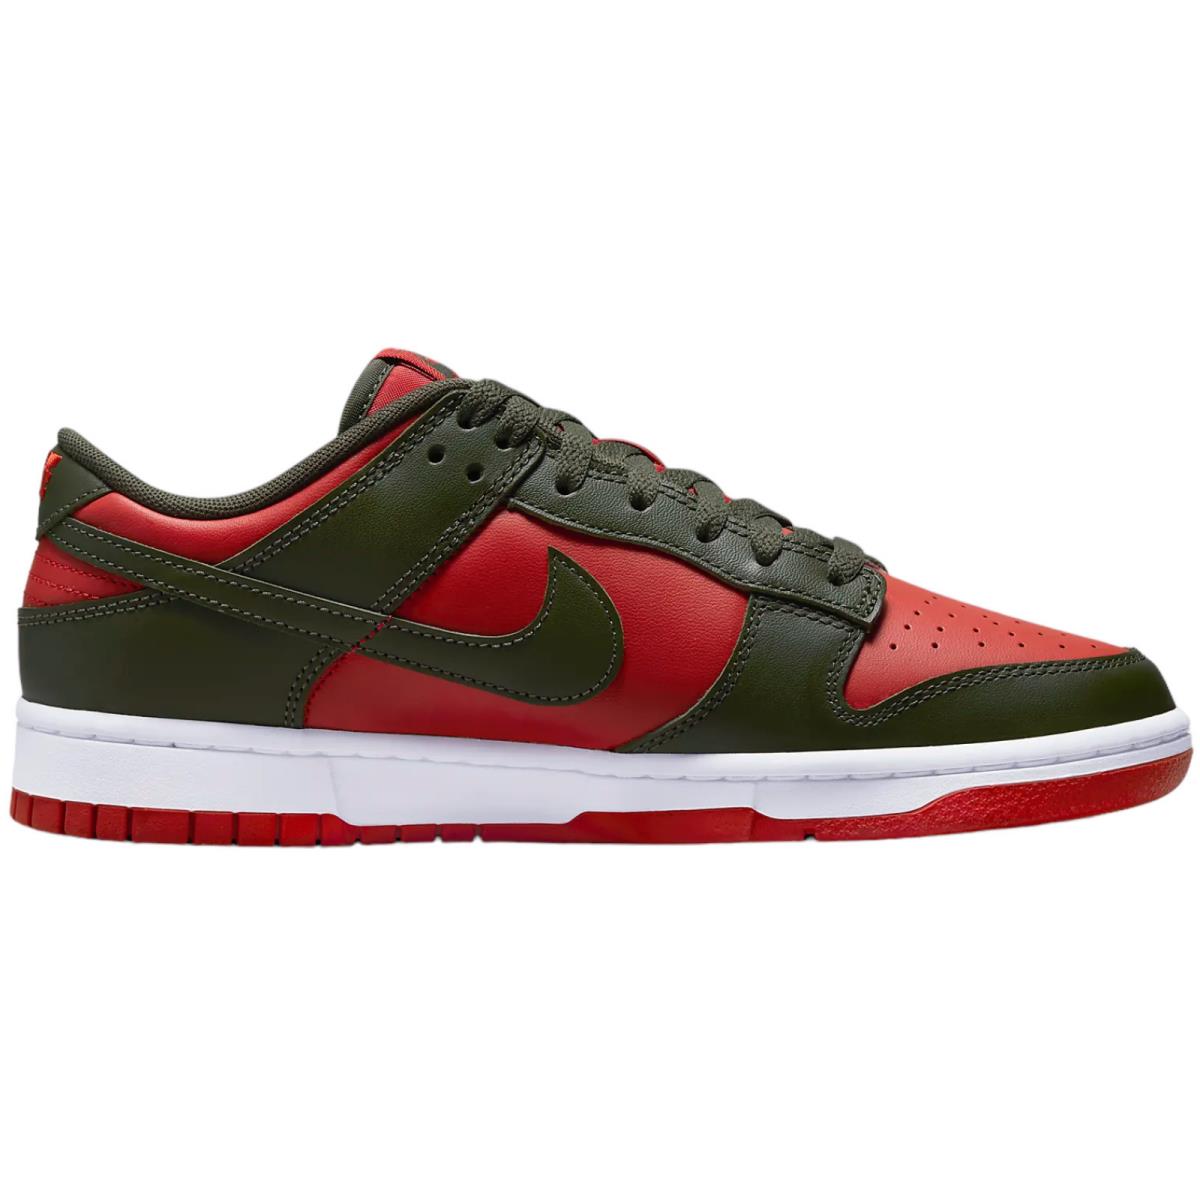 Nike Dunk Low Retro Men`s Casual Shoes All Colors US Sizes 7-14 Mystic Red/White/Cargo Khaki